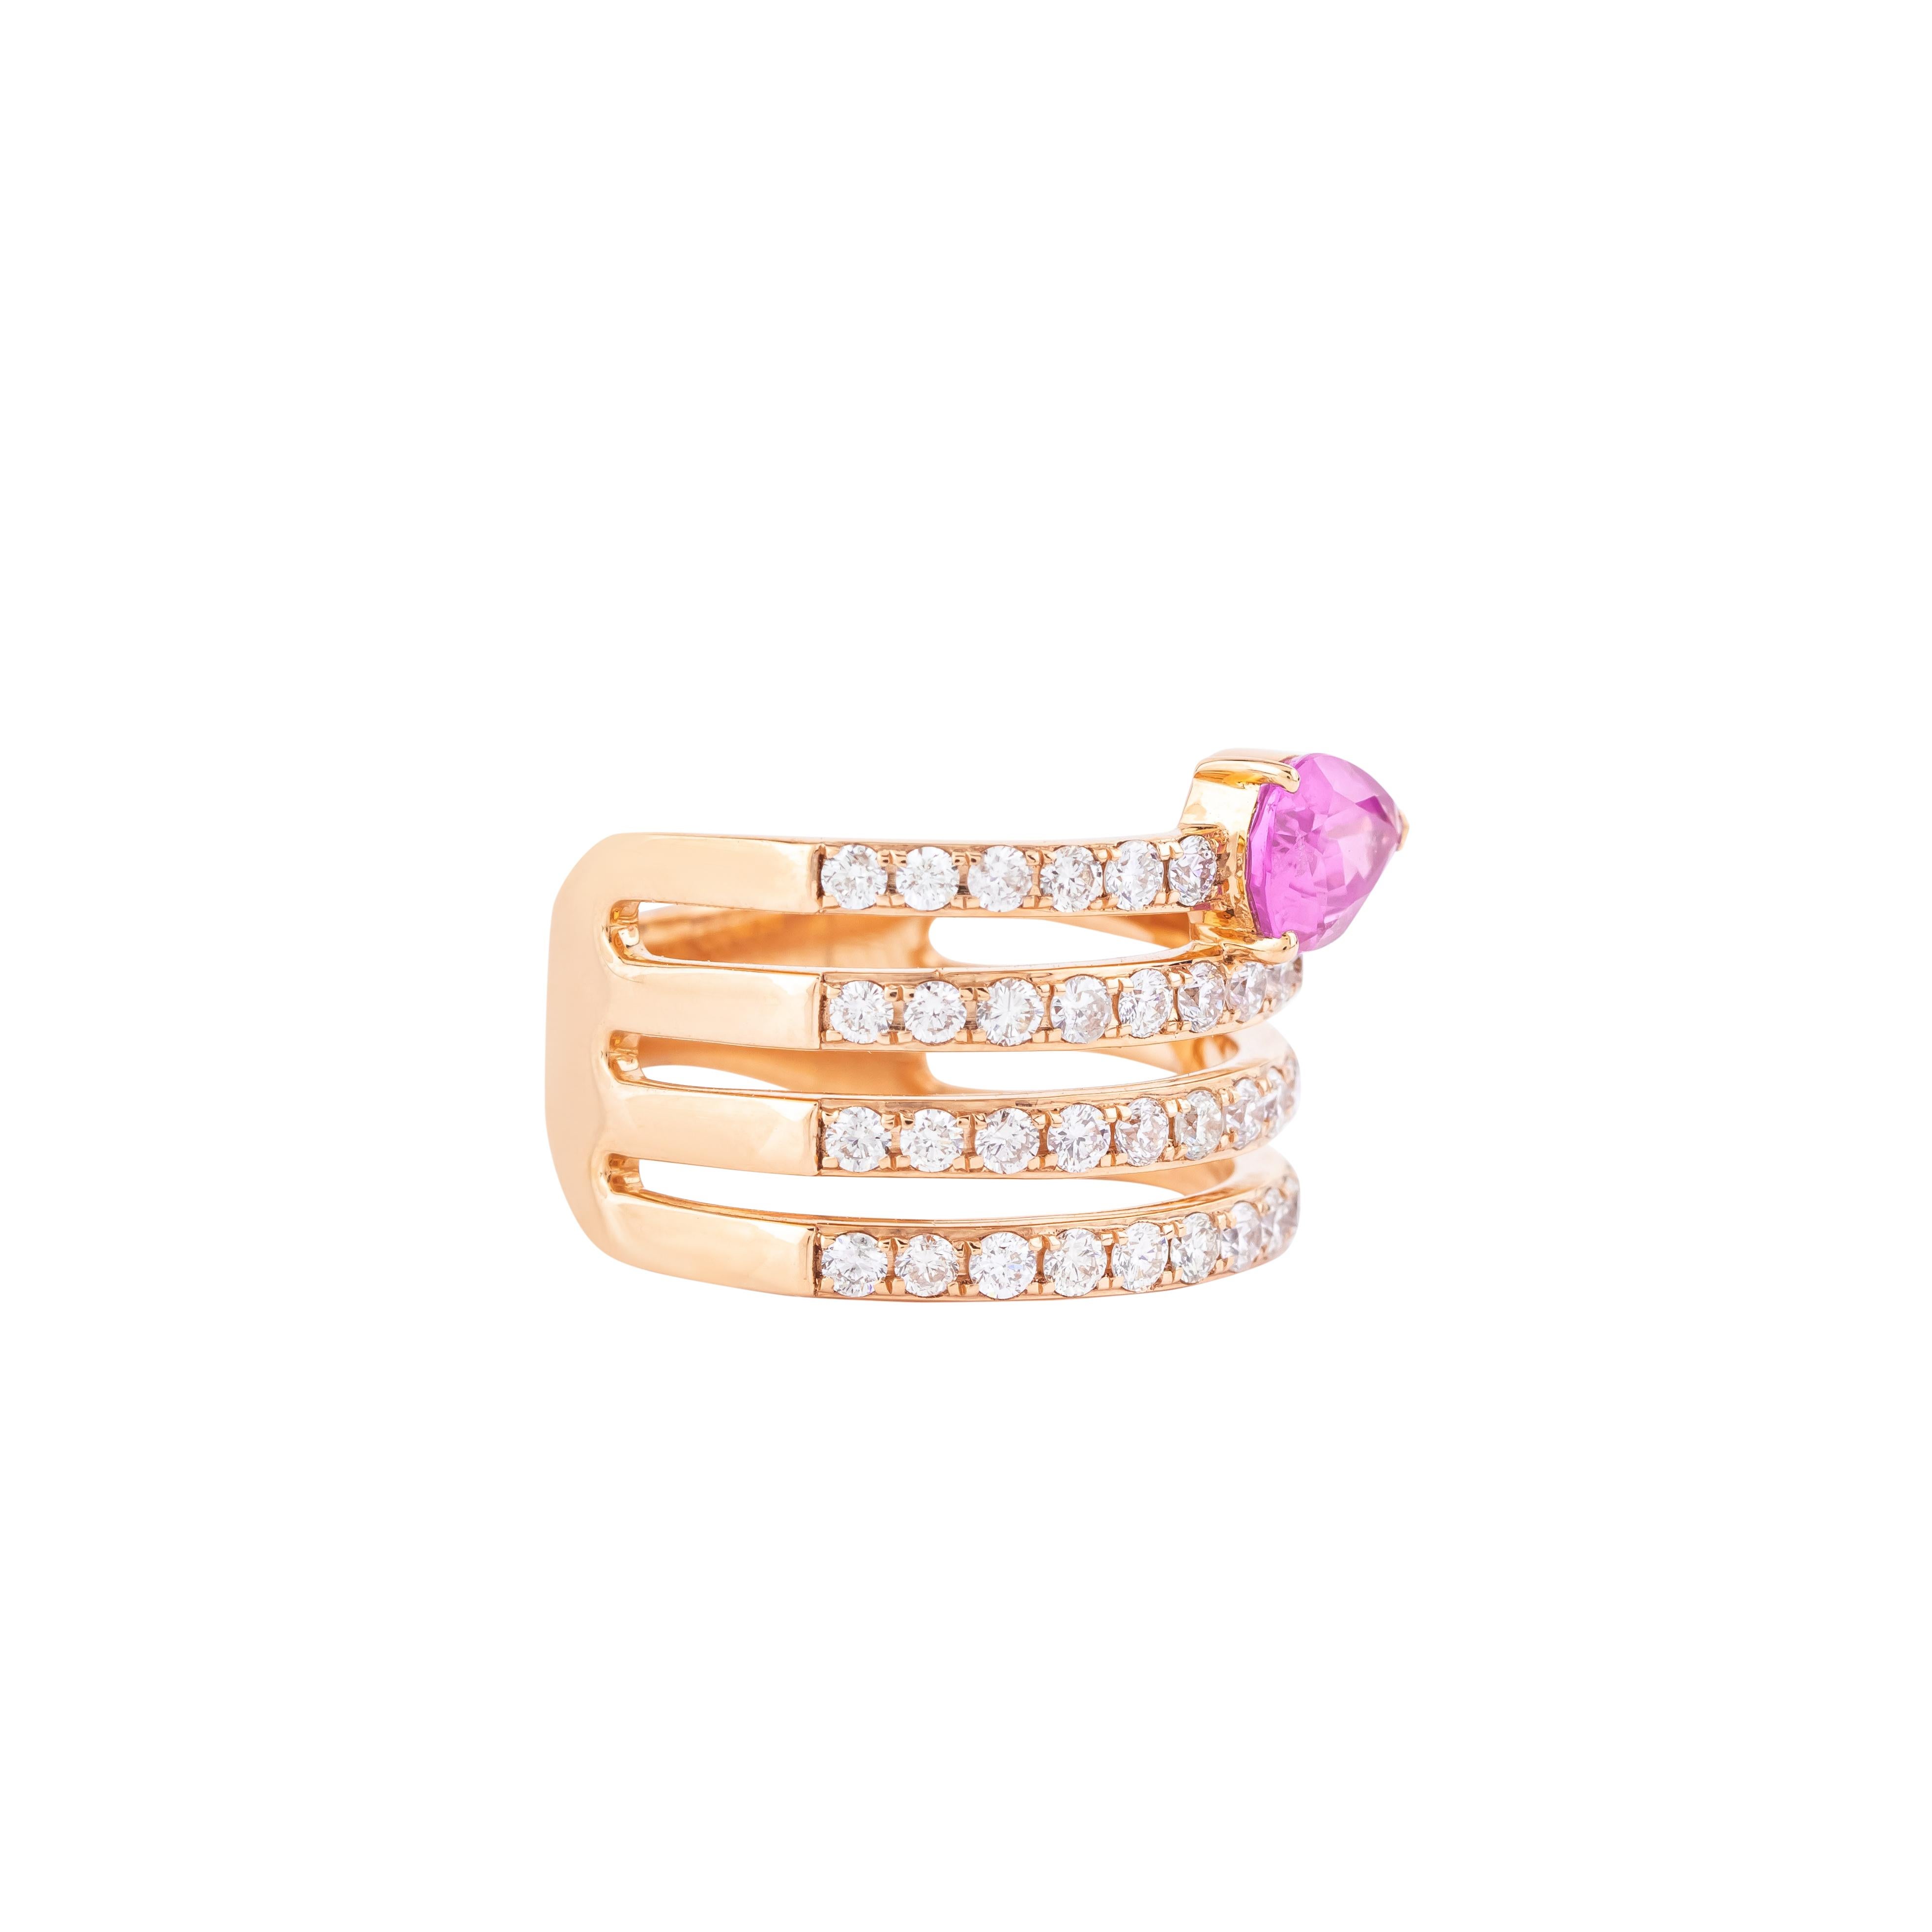 Modern 18 Karat Gold 2.24 Carat Diamond and Pink Sapphire Cocktail Ring For Sale